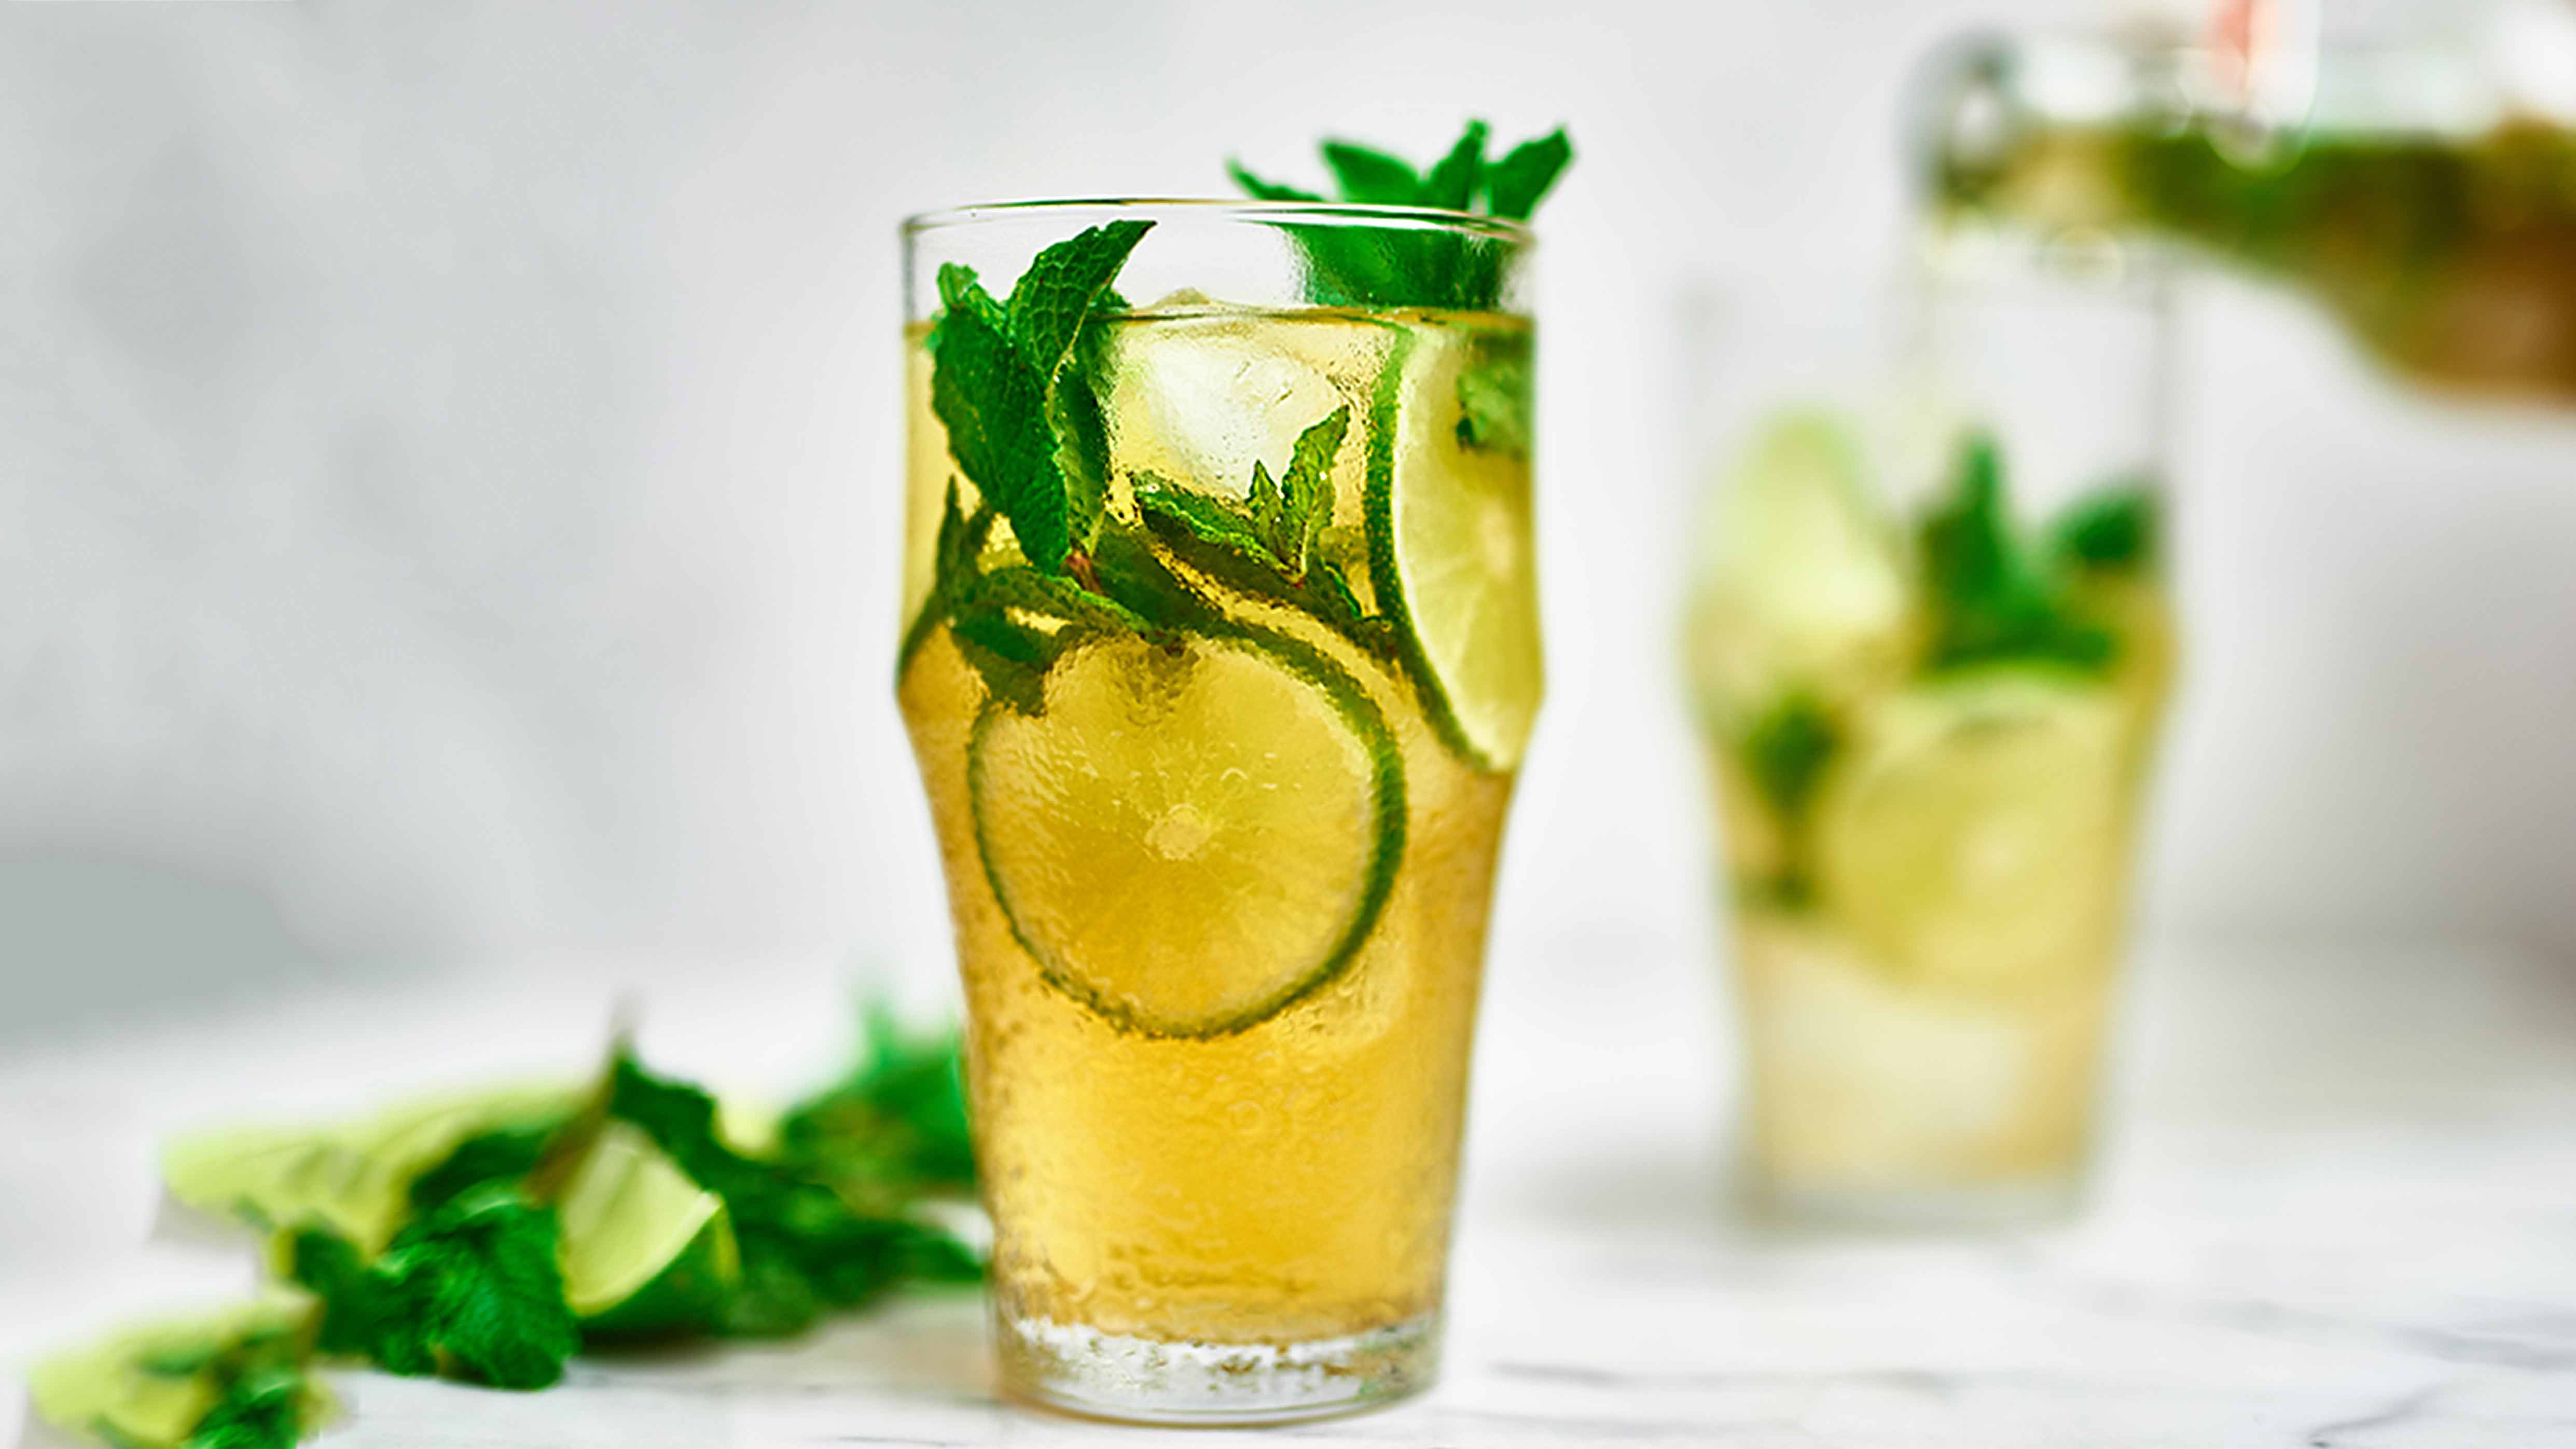 Three delicious + festive mocktails for your New Year’s soirée